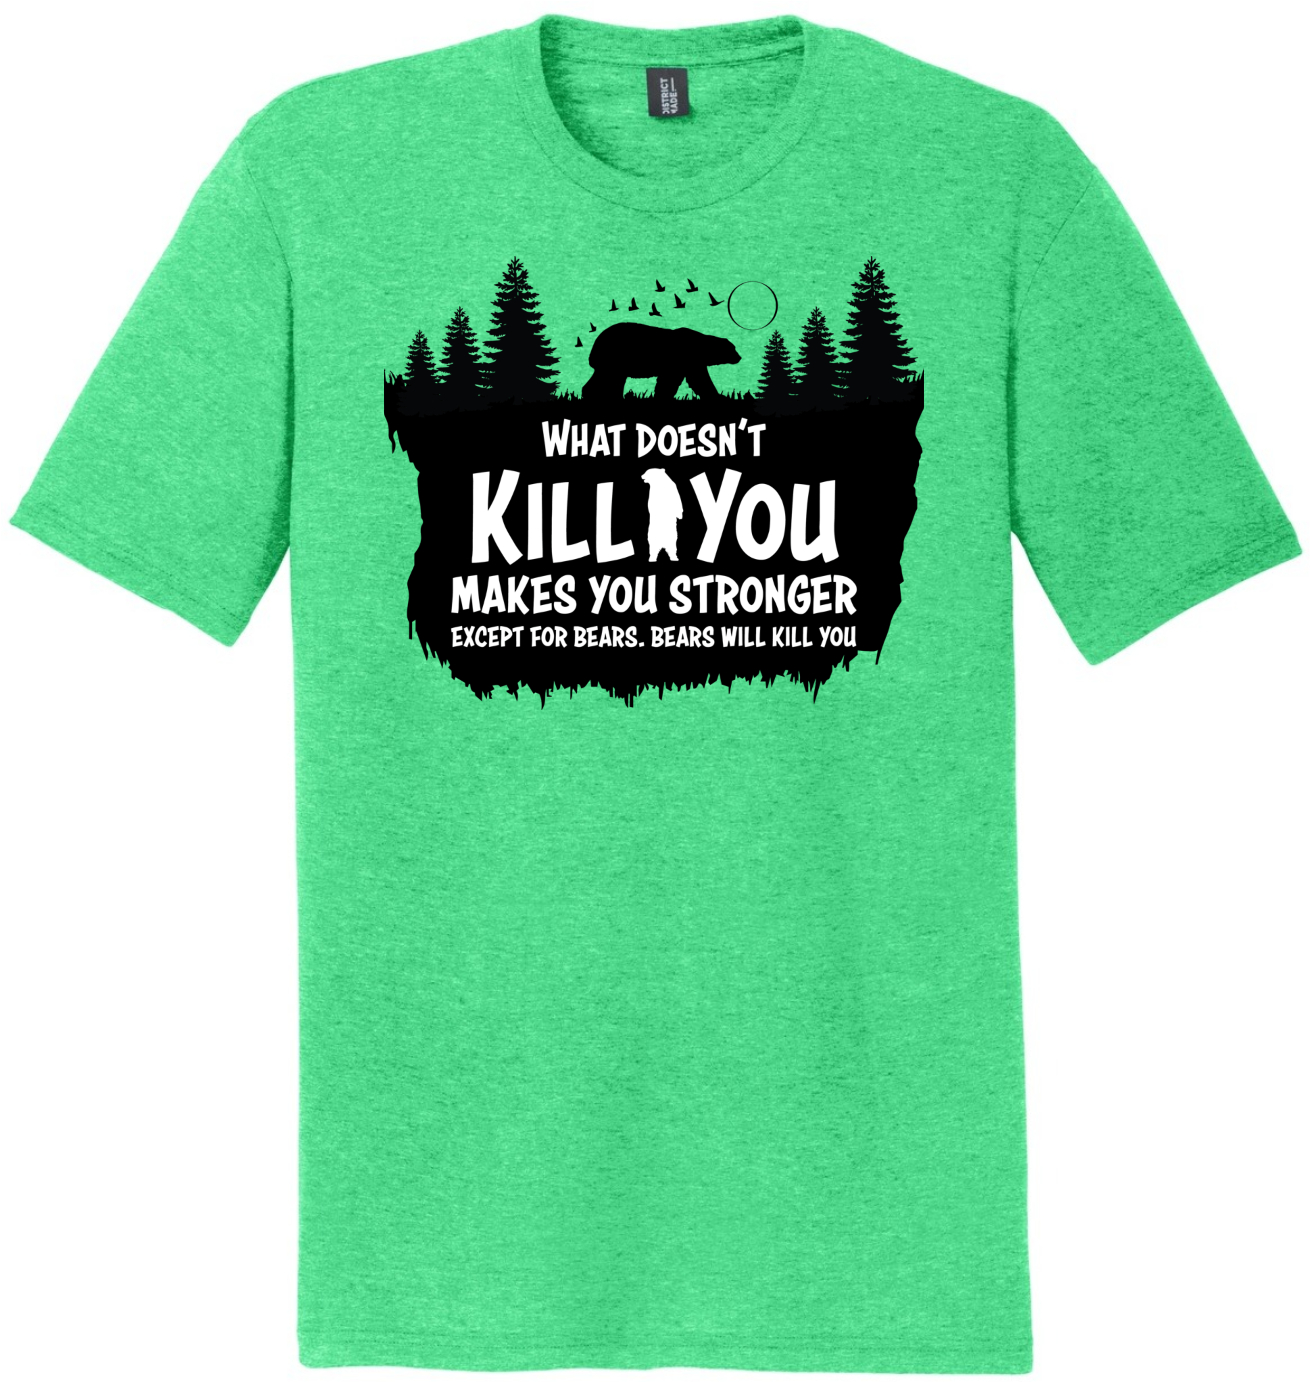 What Doesn't Kill You Makes You Stronger, Except For Bears. Bears Will Kill You